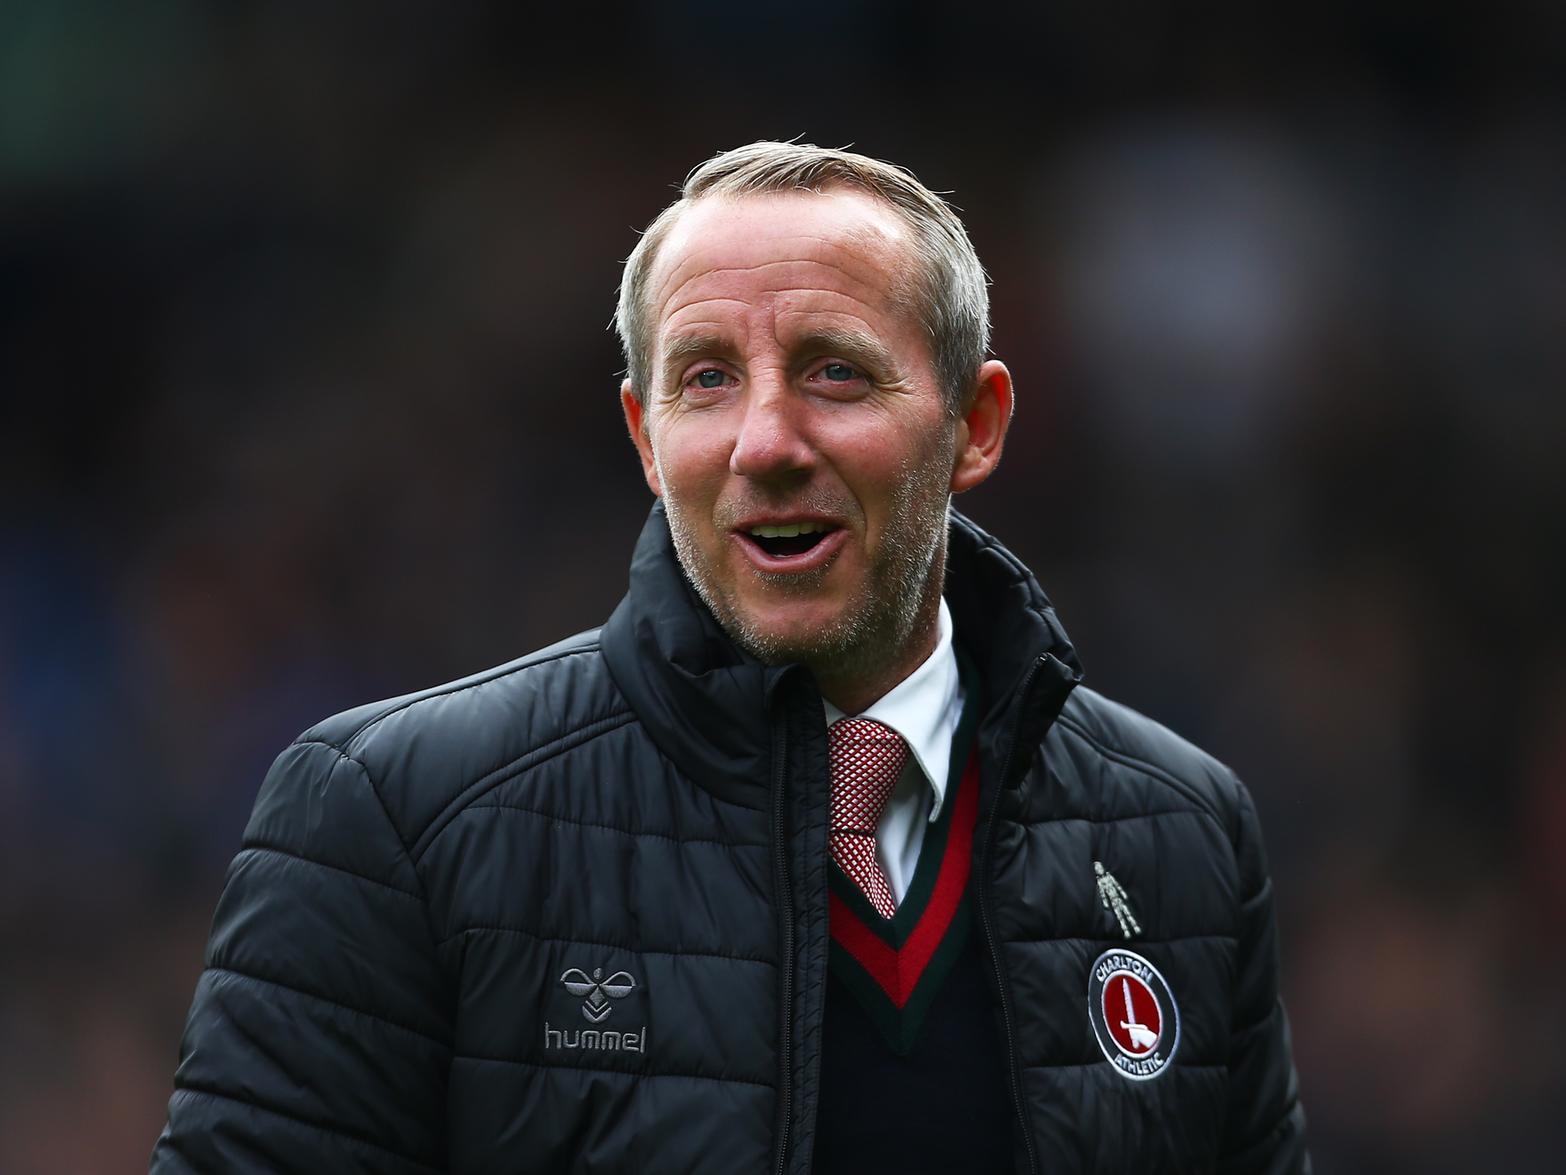 Charlton Athletic's Lee Bowyer has issued a rallying cry to Addicks fans ahead of Saturday's clash against Sheffield Wednesday, urging them to get behind the side without a win in six games. (South London Press)